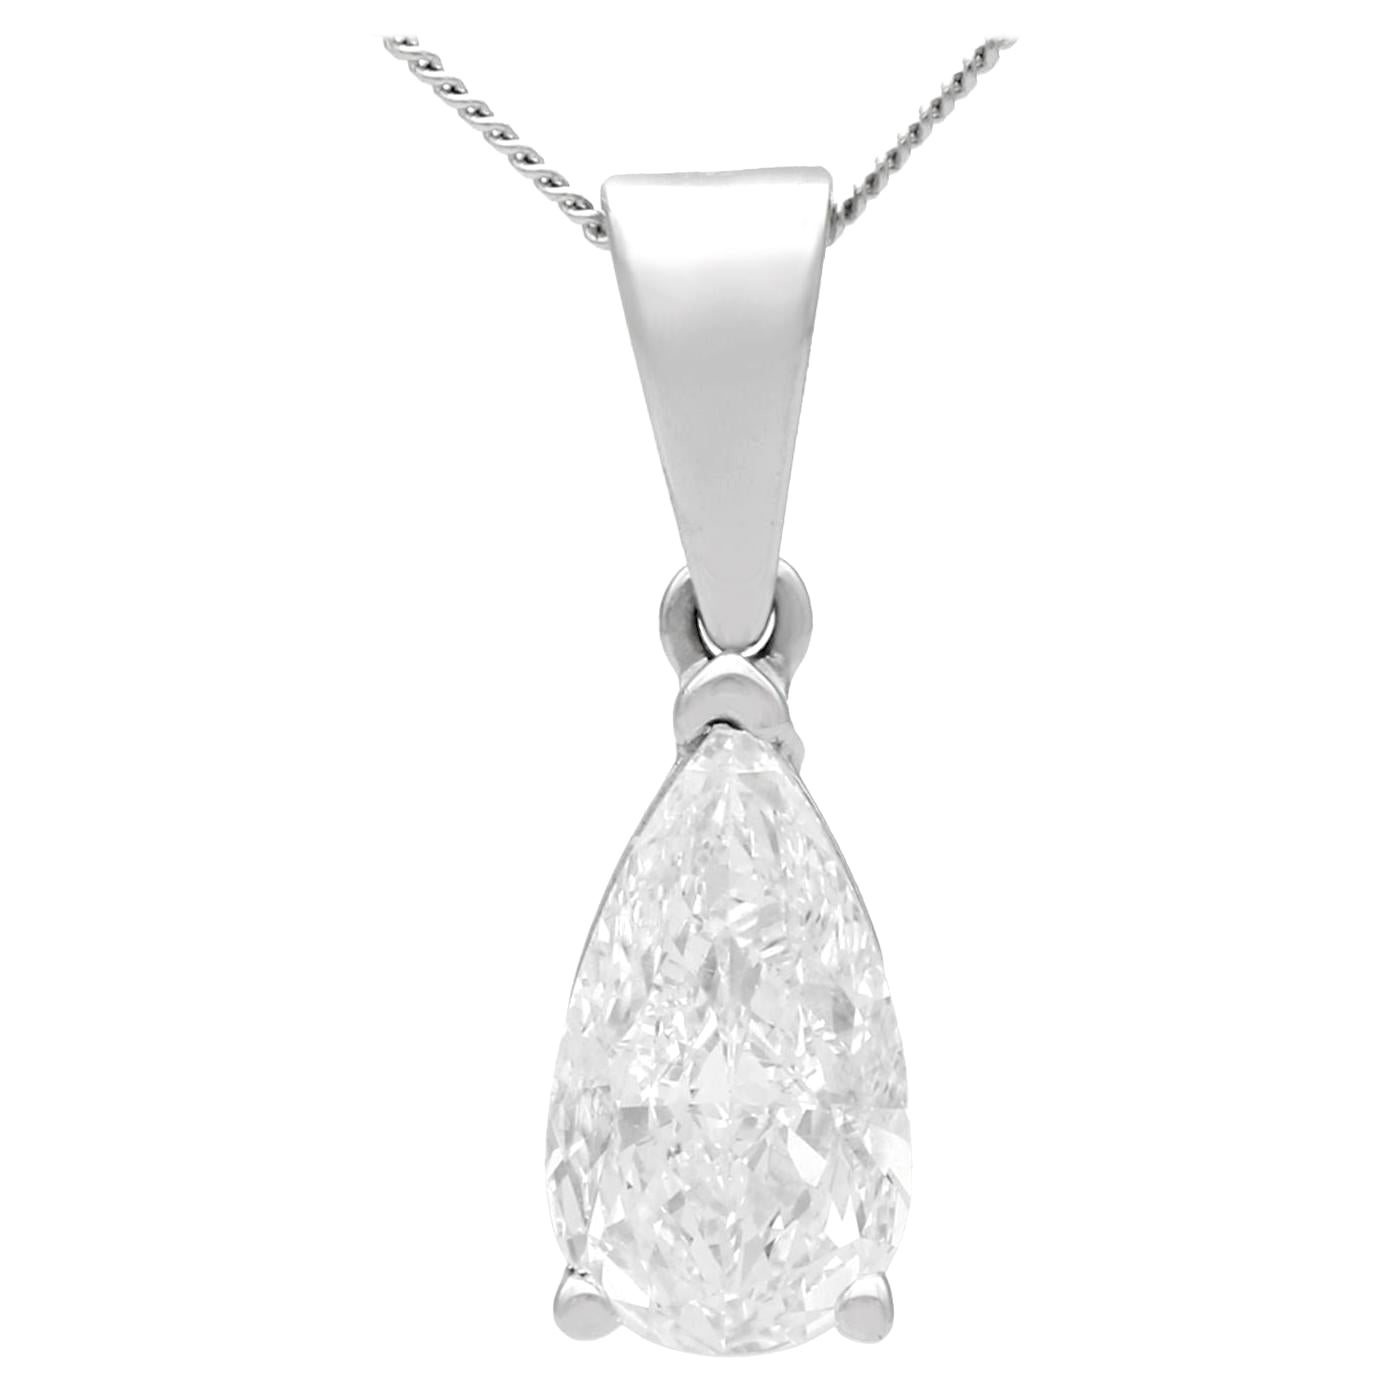 Contemporary French 1.02 Carat Diamond and White Gold Pendant For Sale